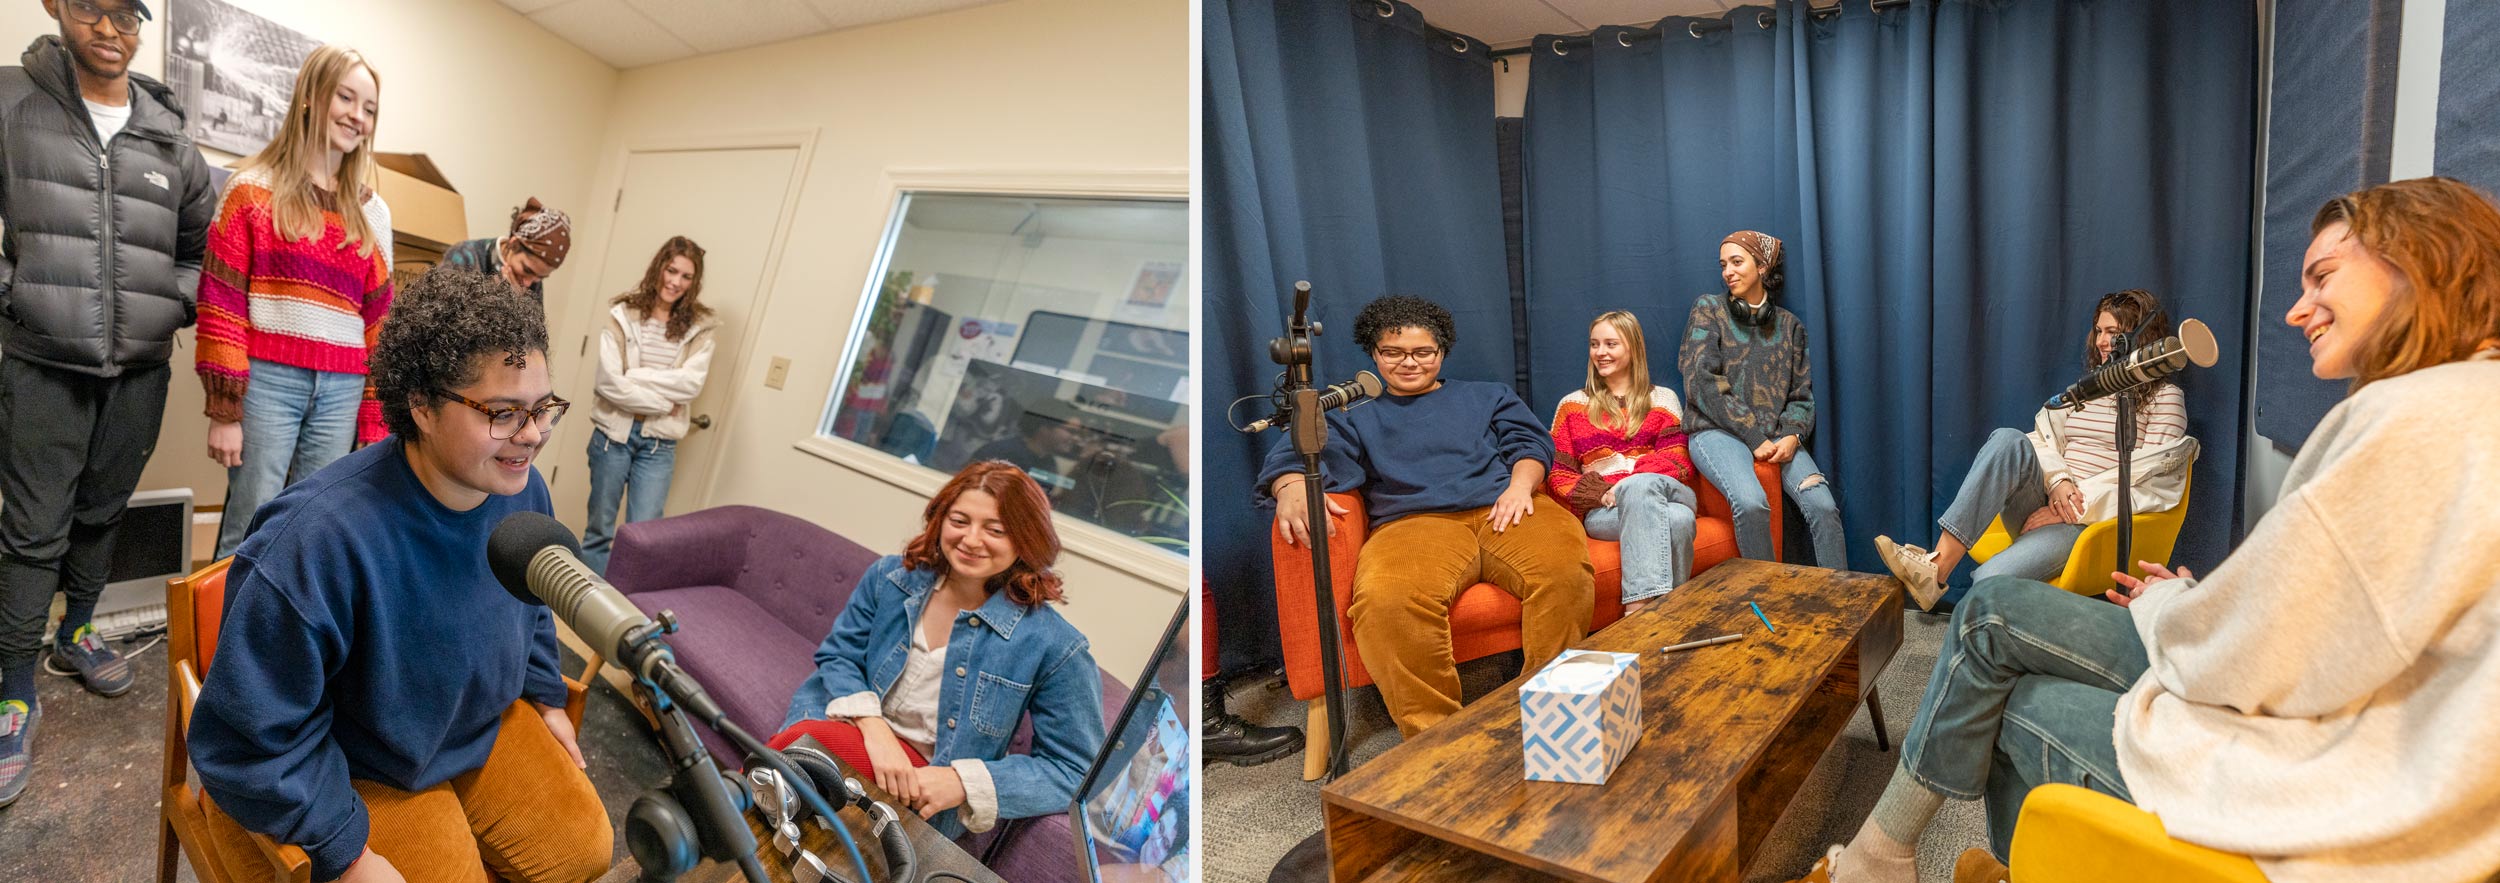 Left, Kalah Roché at a microphone practicing recording a podcast while classmates watch on; Right, Students sitting around the studio together